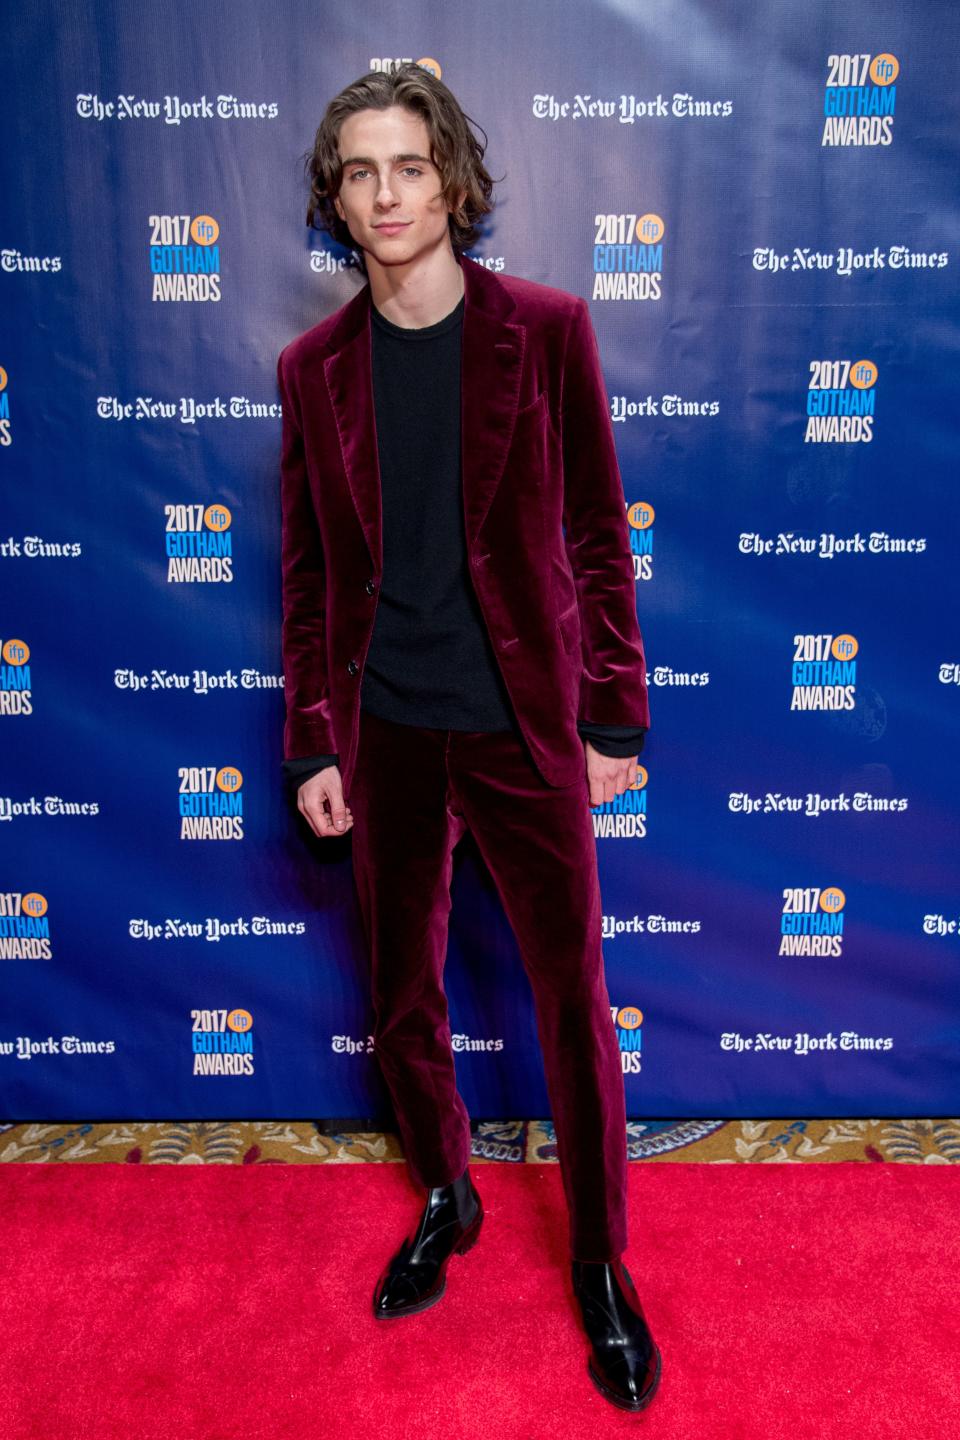 Timothee Chalamet attends the 2017 IFP Gotham Awards